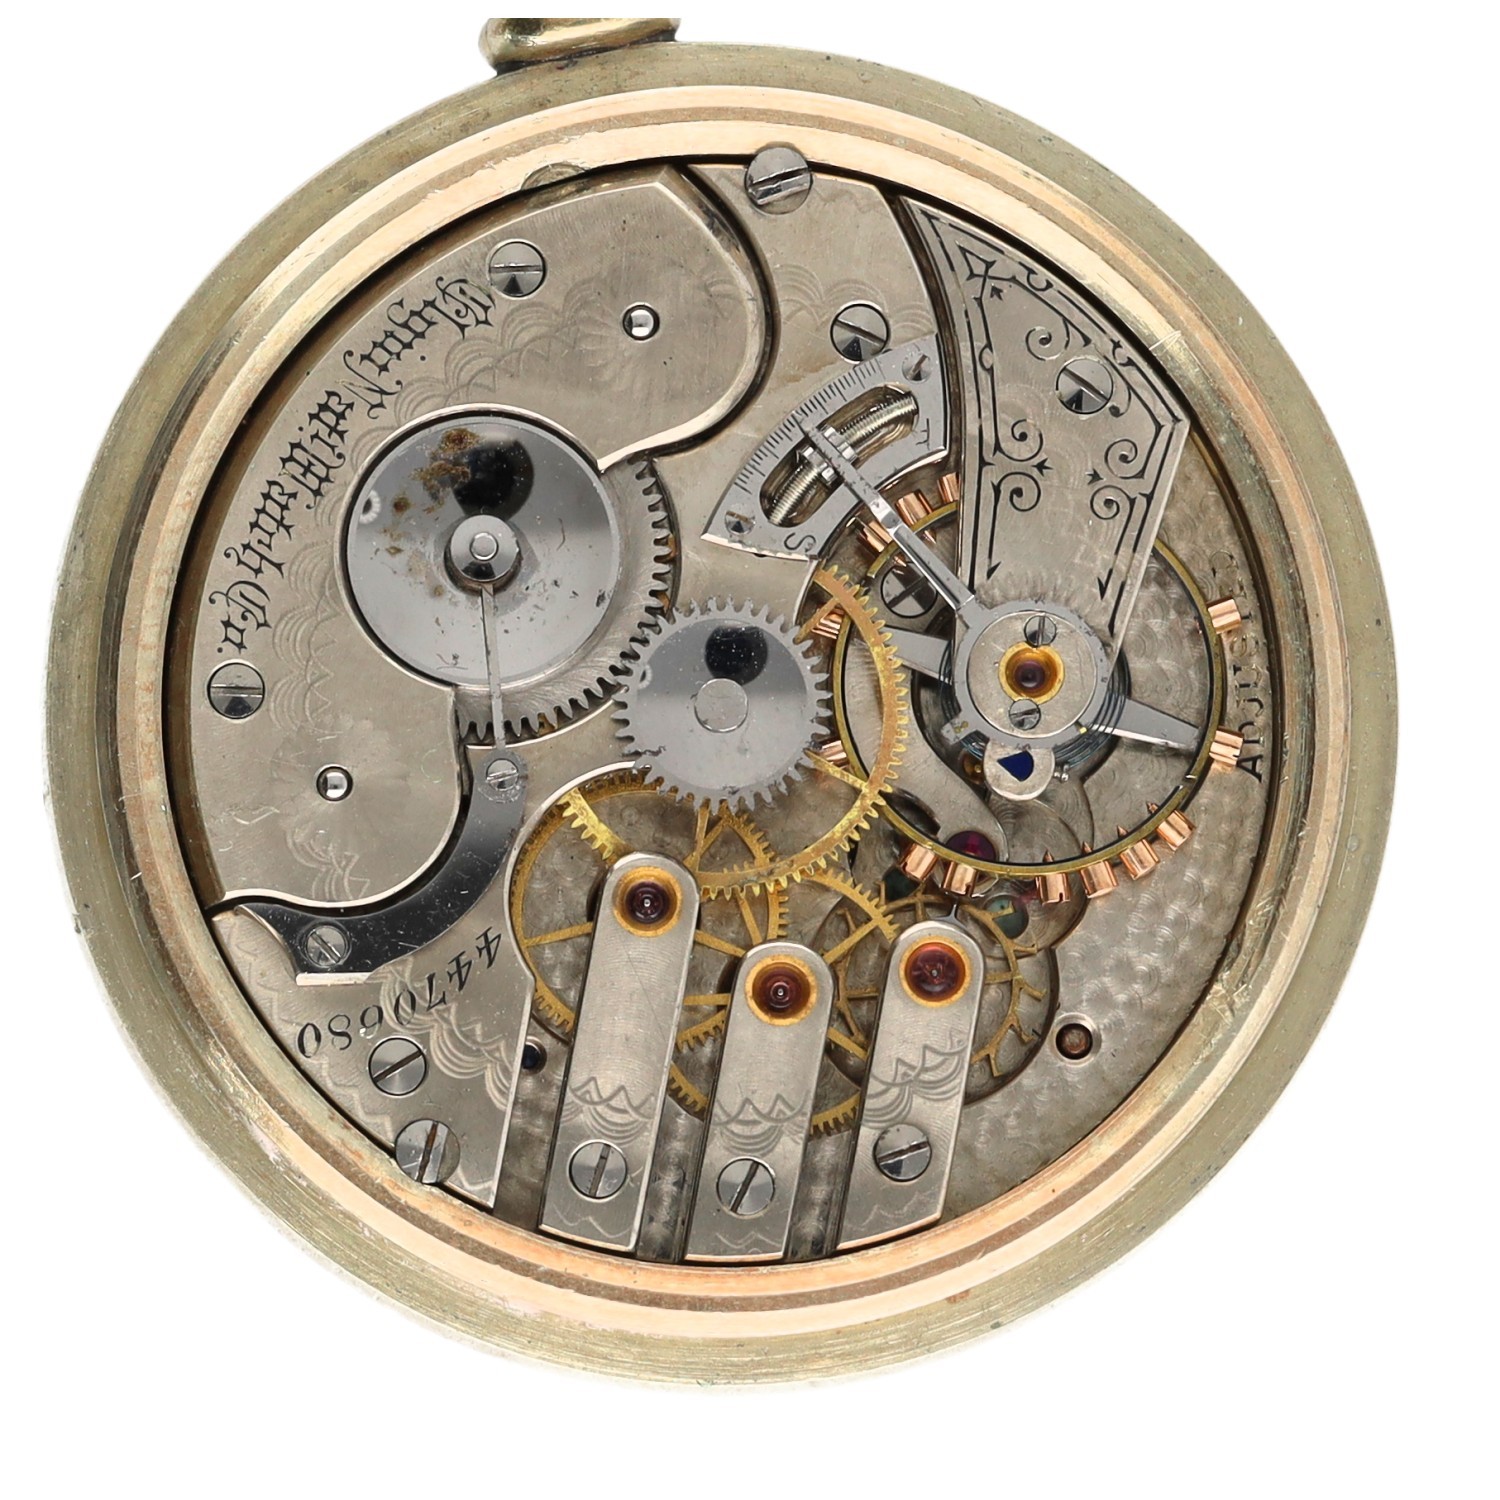 Elgin National Watch Co. lever set nickel cased pocket watch, circa 1891, serial no. 4470680, signed - Image 2 of 3